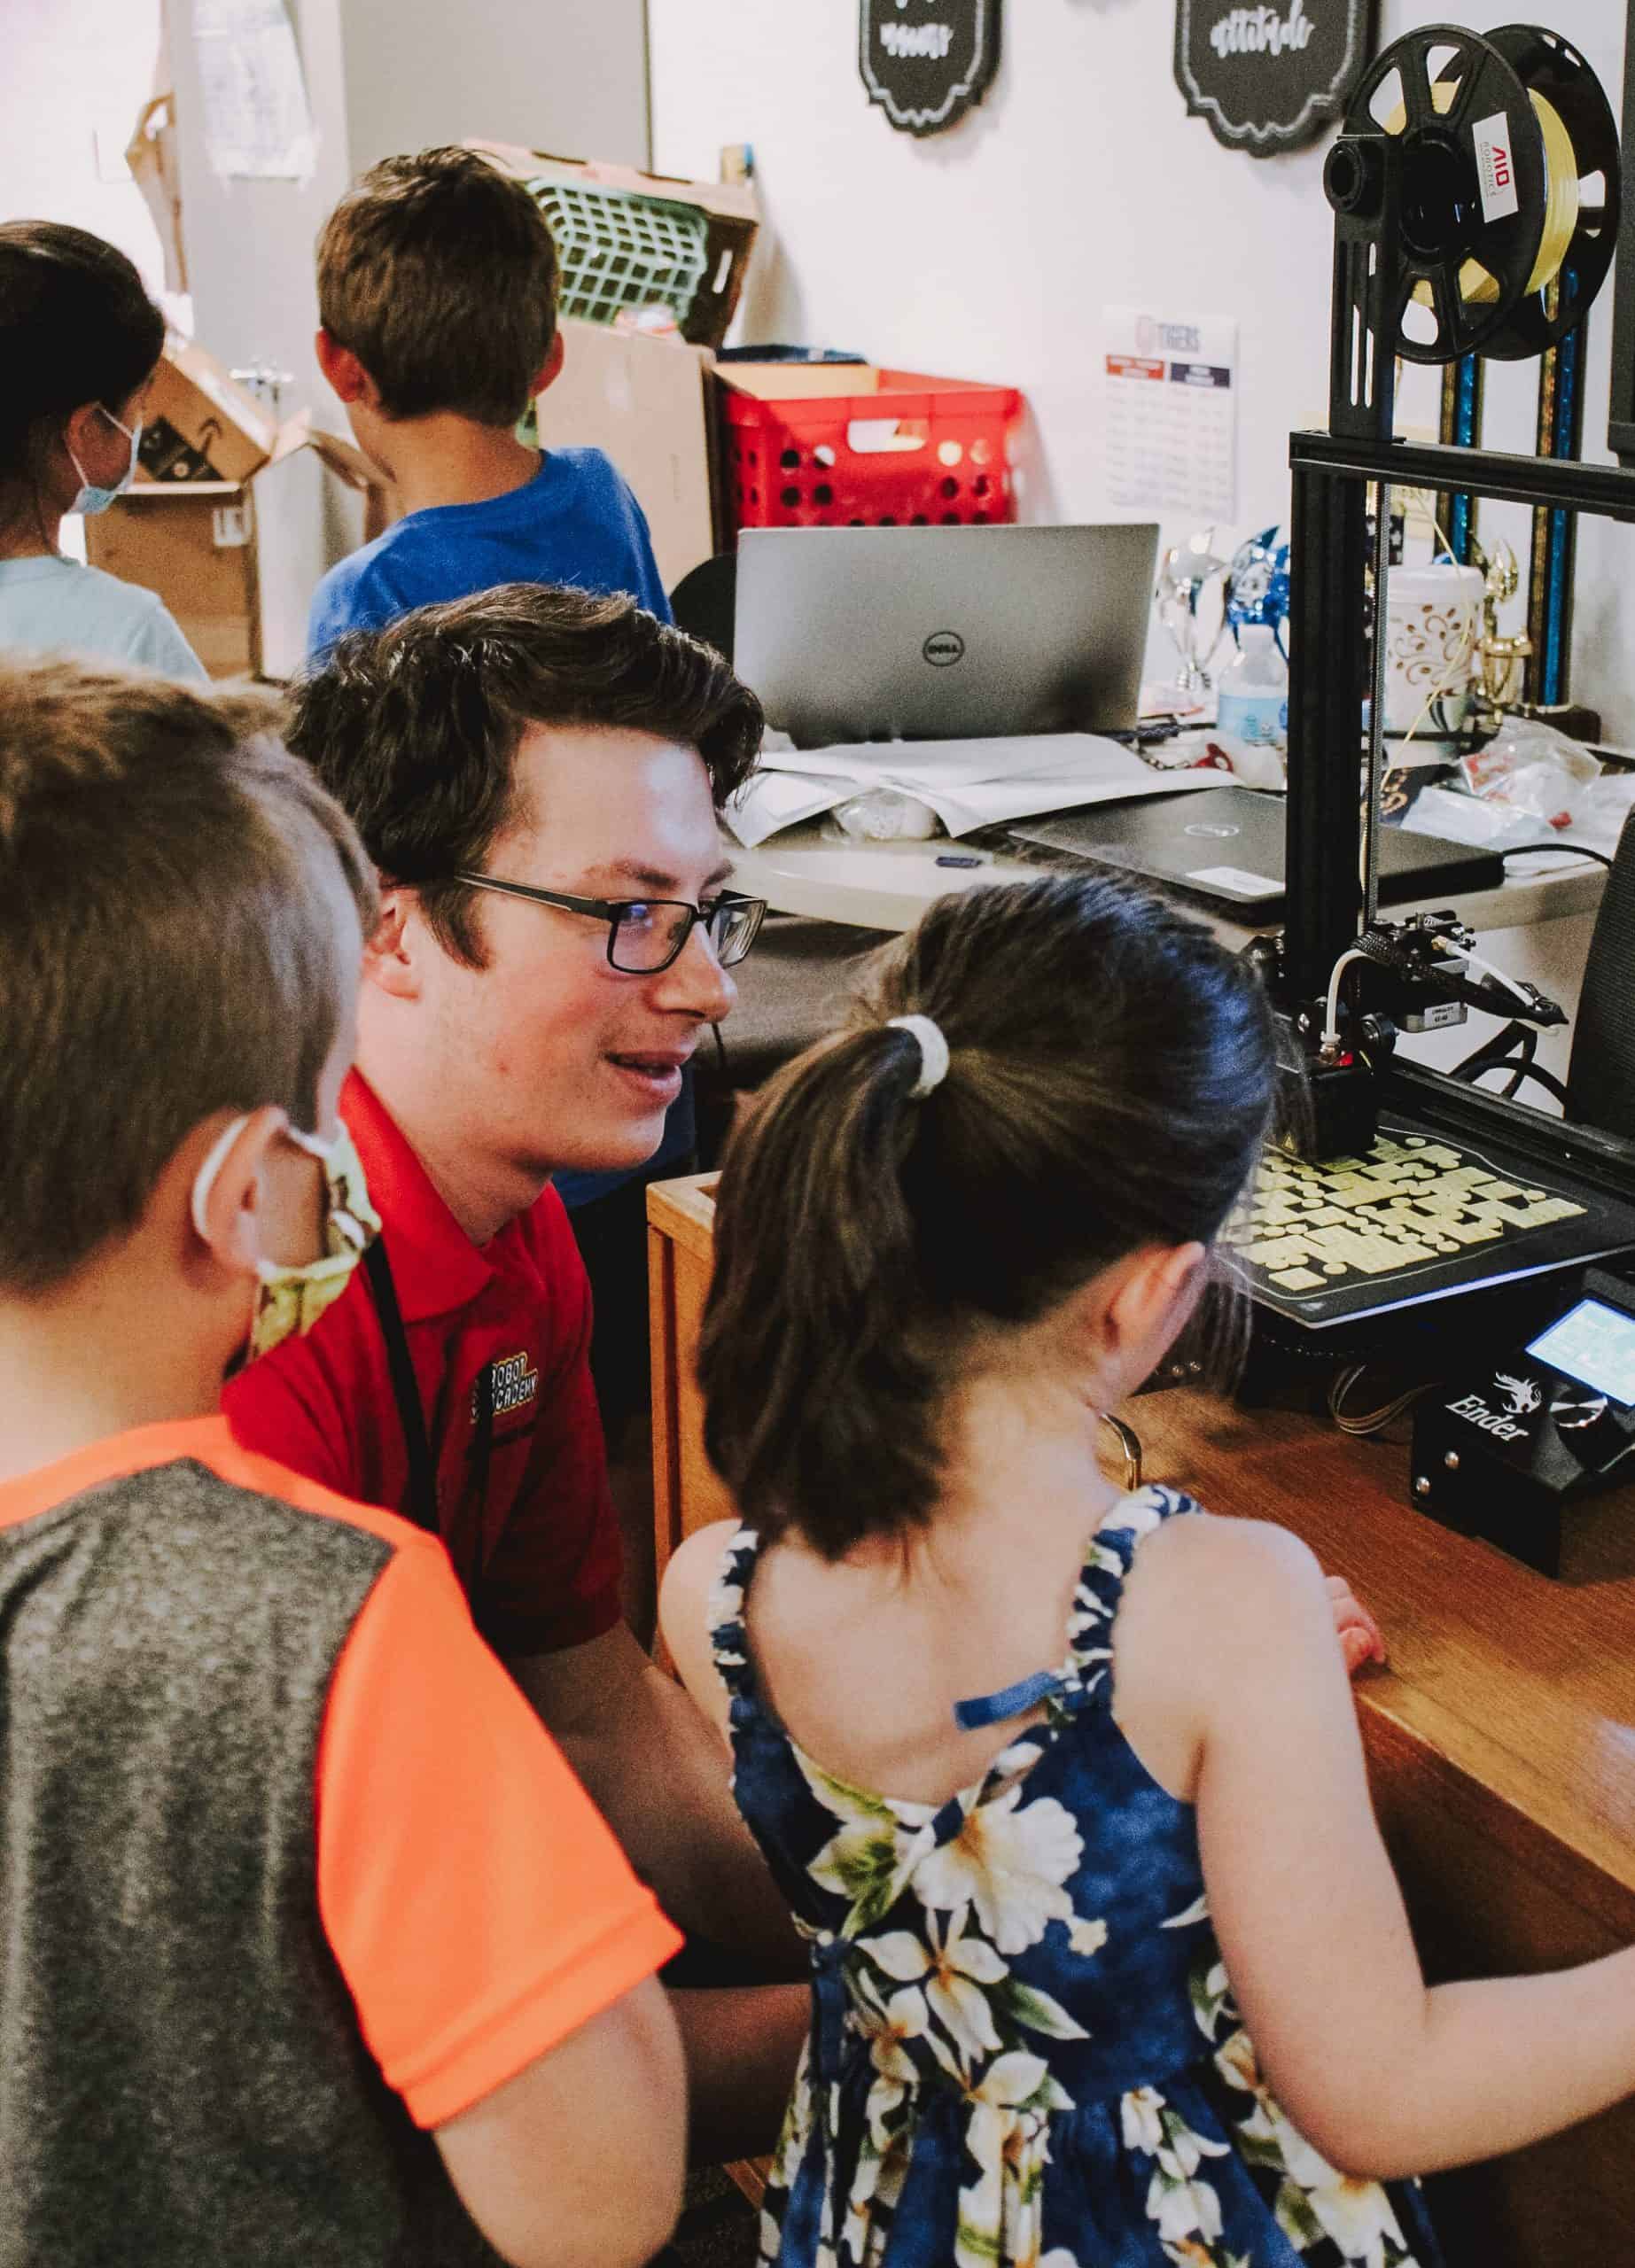 You are currently viewing Jr. LEGO® Robotics & 3D Printing Camp for ages 5 to 8 | Morning | 5 Days: June 26-30, 2023 | 9:30 am to 12:30 pm | Upper Arlington